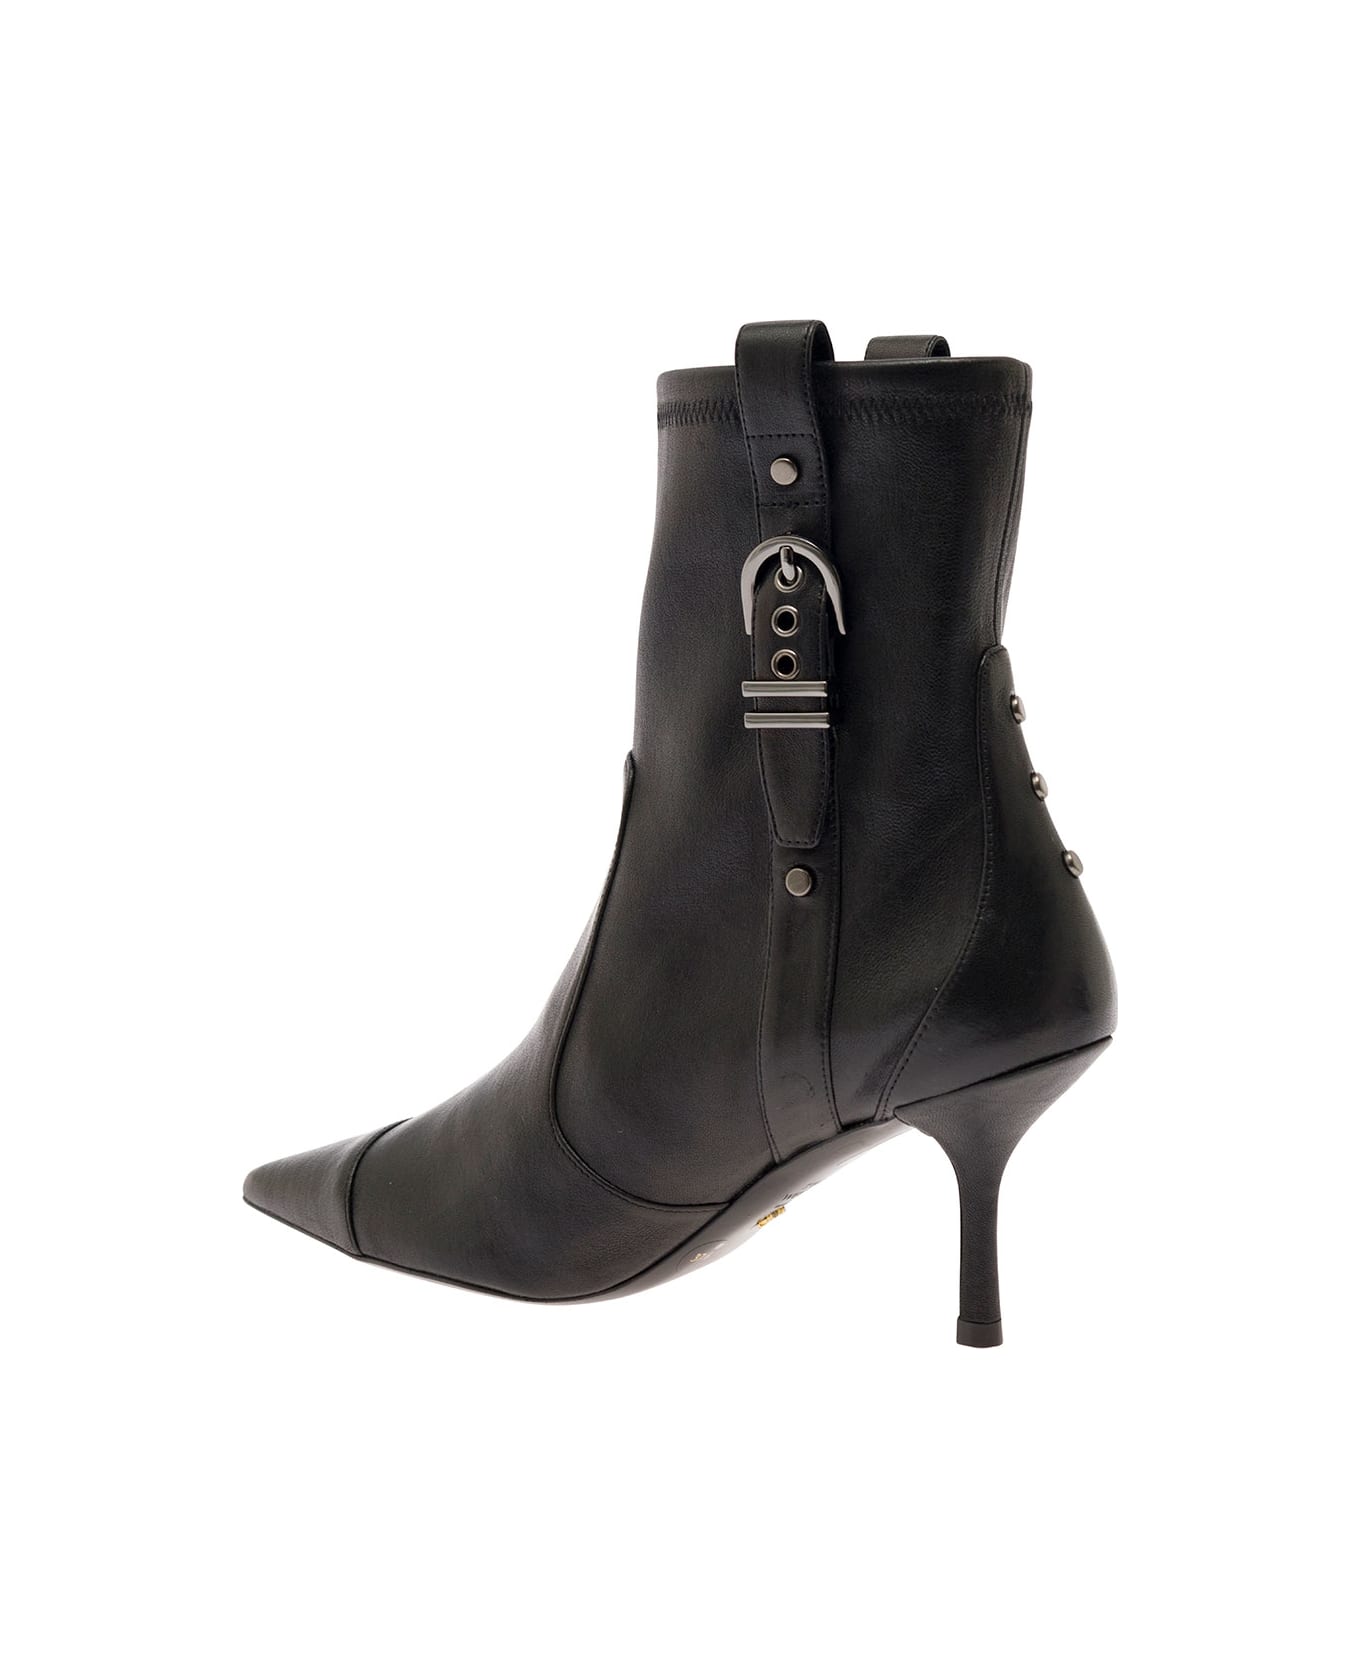 Stuart Weitzman Black Bootie With Buckle Detail And Stiletto Heel In Smooth Leather Woman - Black ブーツ